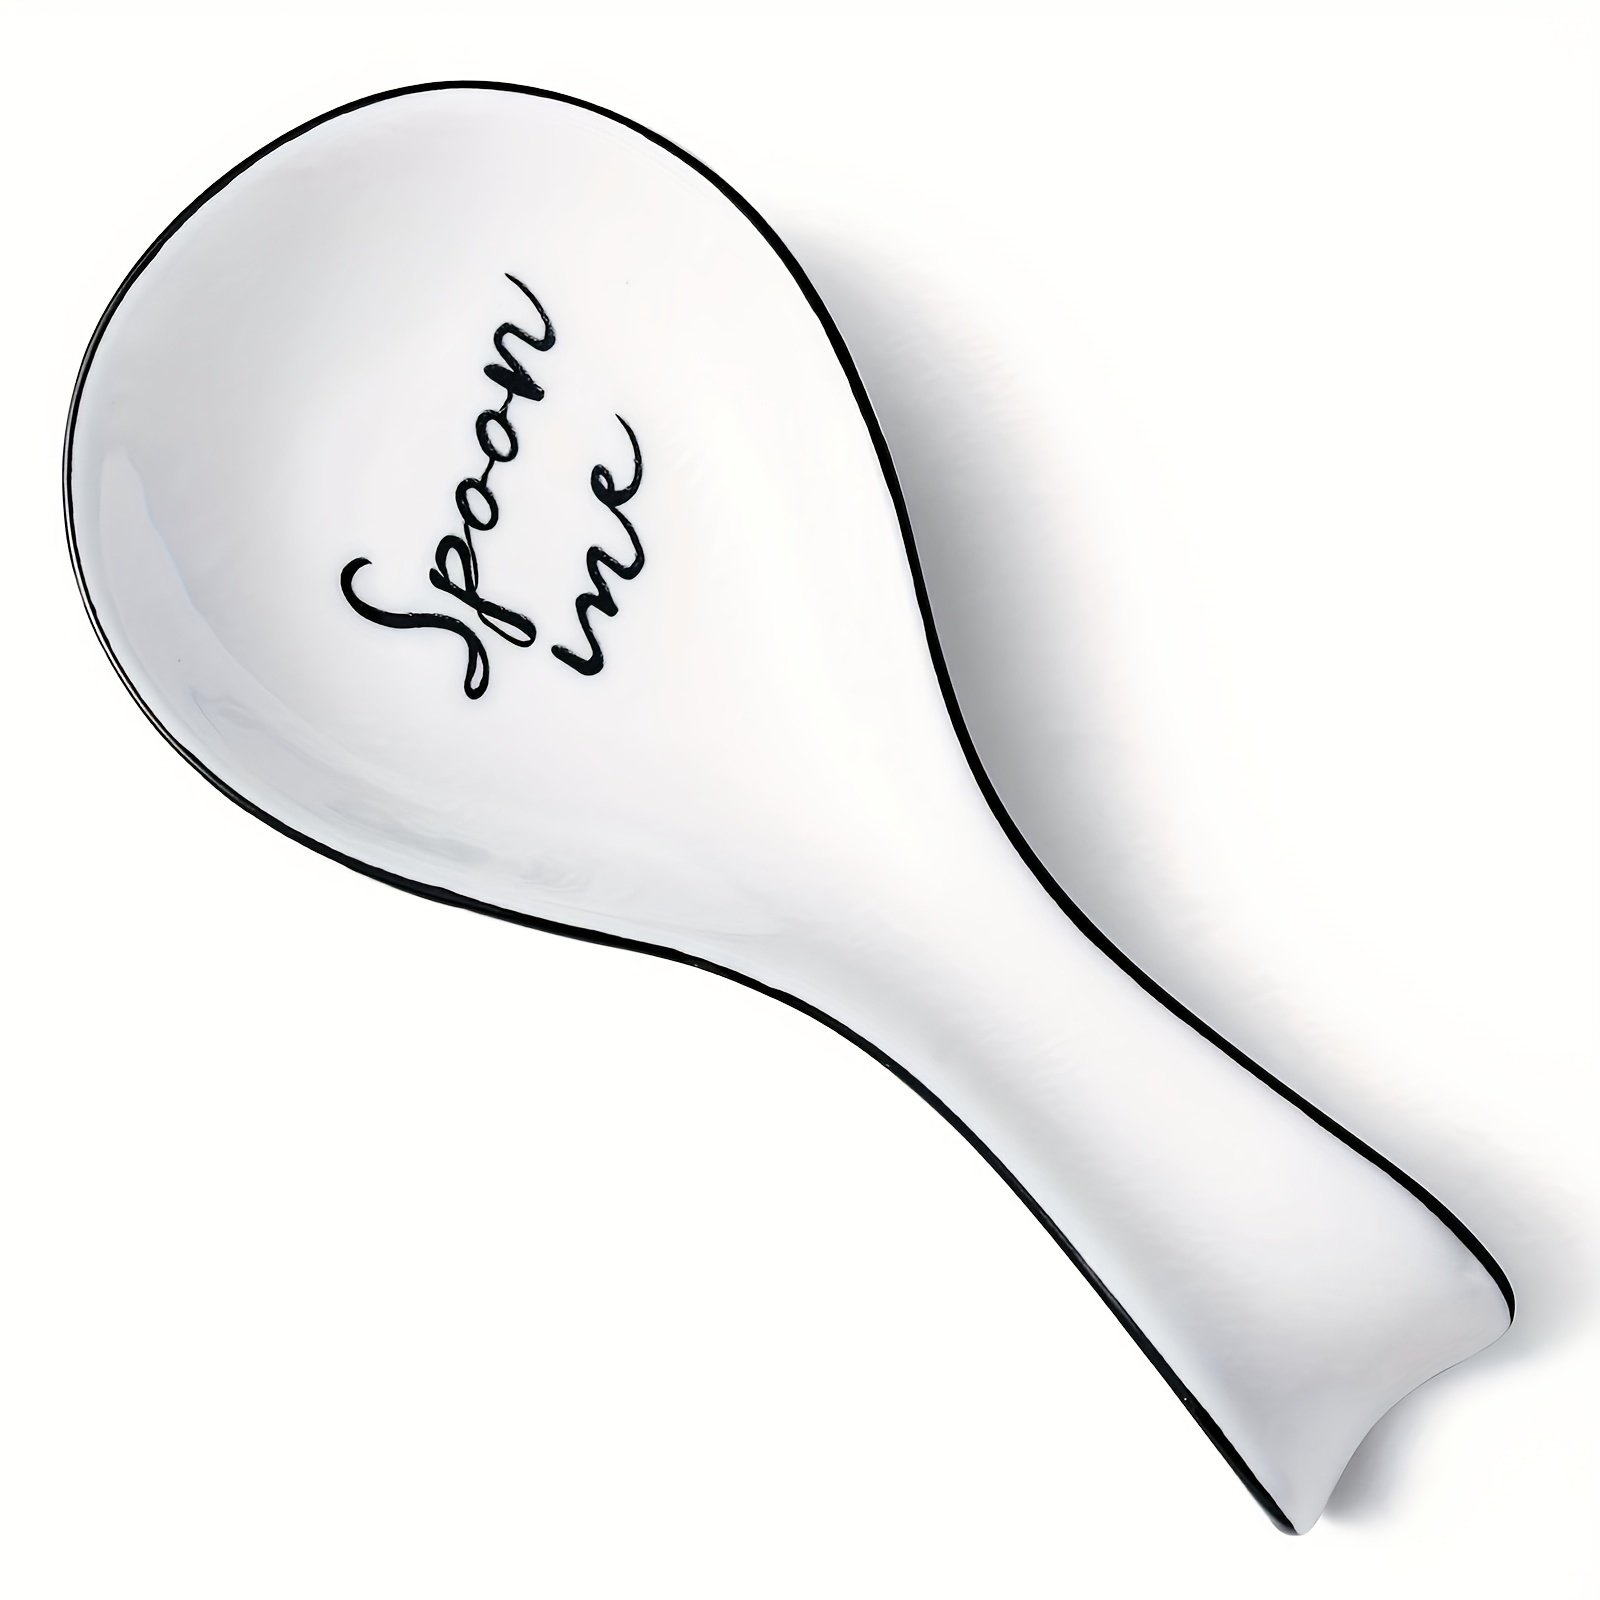 Ceramic Spoon Rest With Blue Cow 5 Long and 3 1/2 Wide at Top 